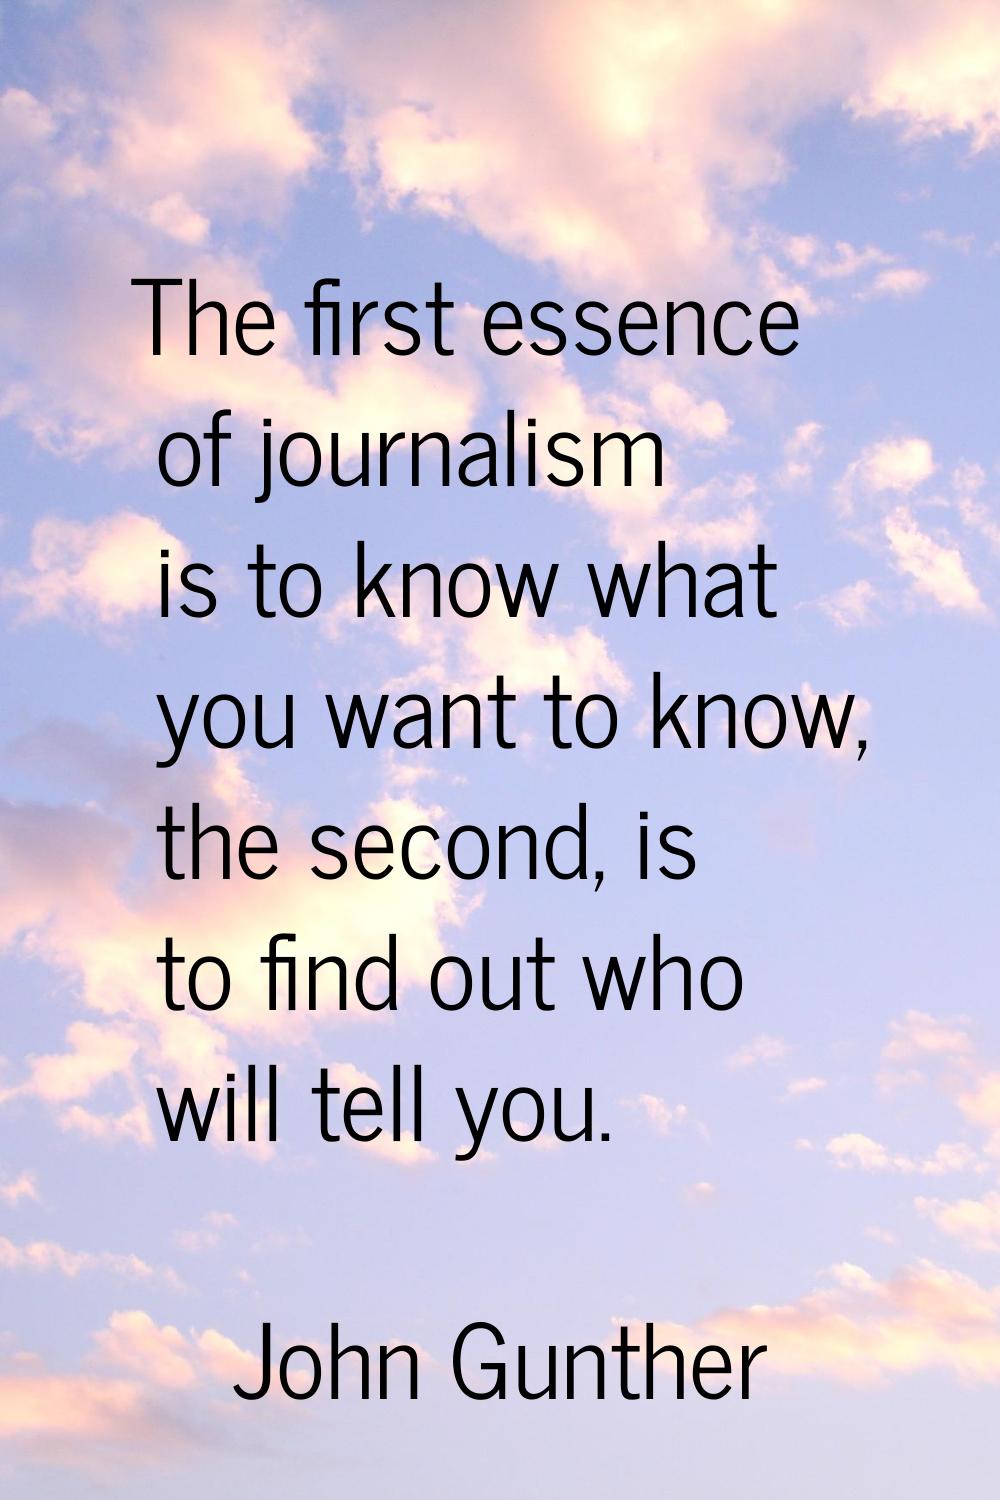 The first essence of journalism is to know what you want to know, the second, is to find out who wi